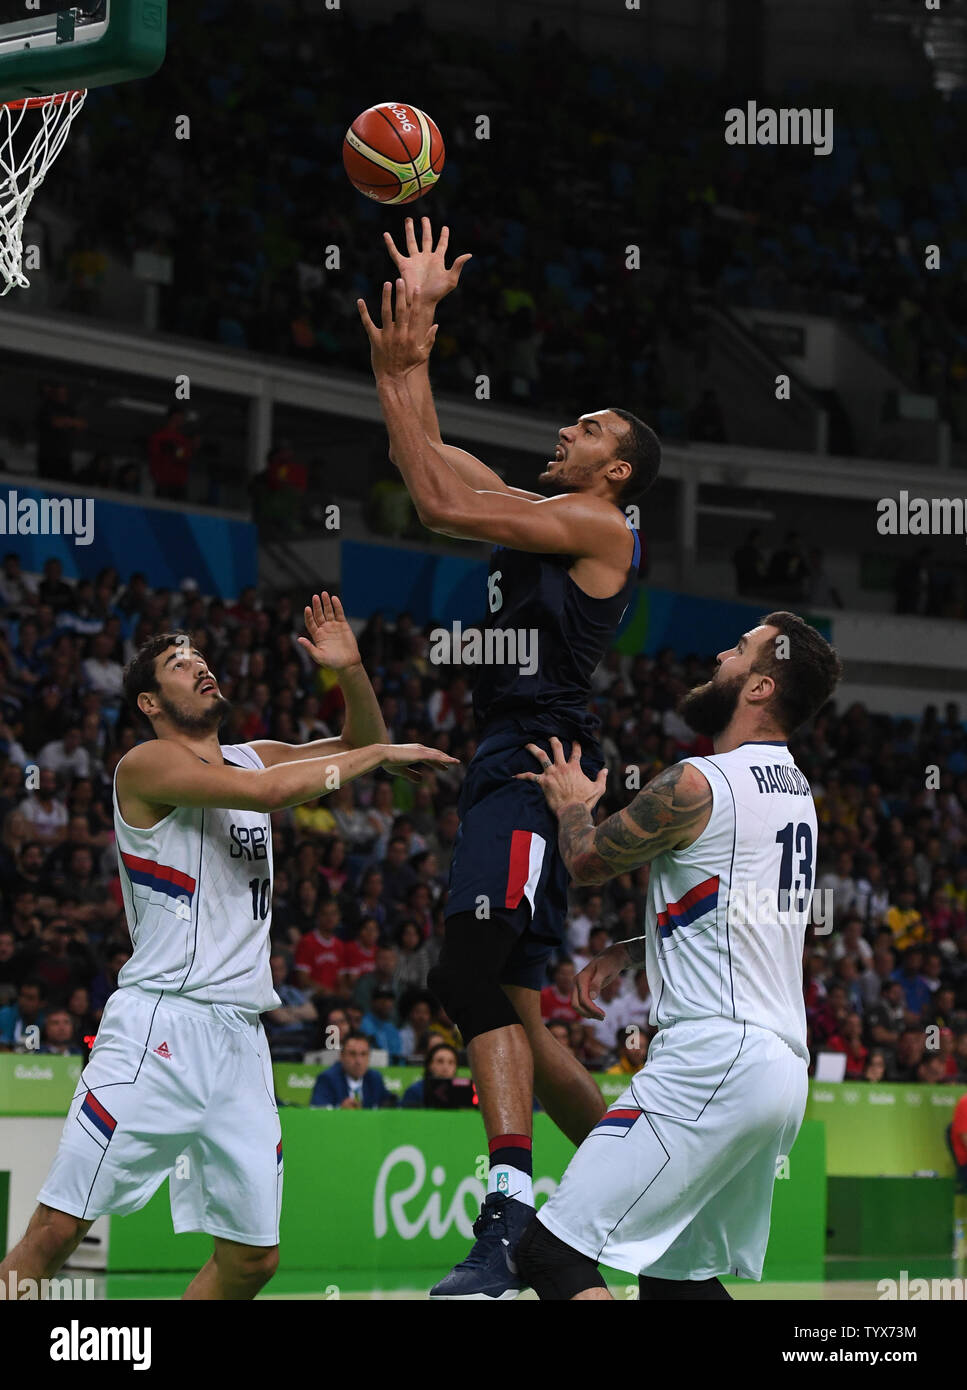 Rudy Gobert (C) of France puts up the ball between Serbia's Miroslav Raduljica (13) and Nikola Kalinin (10) in Basketball at the 2016 Rio Summer Olympics in Rio de Janeiro, Brazil, August 10, 2016.  France defeated Serbia 76-75 in a come from behind victory in the last minute.  Photo by Terry Schmitt/UPI Stock Photo